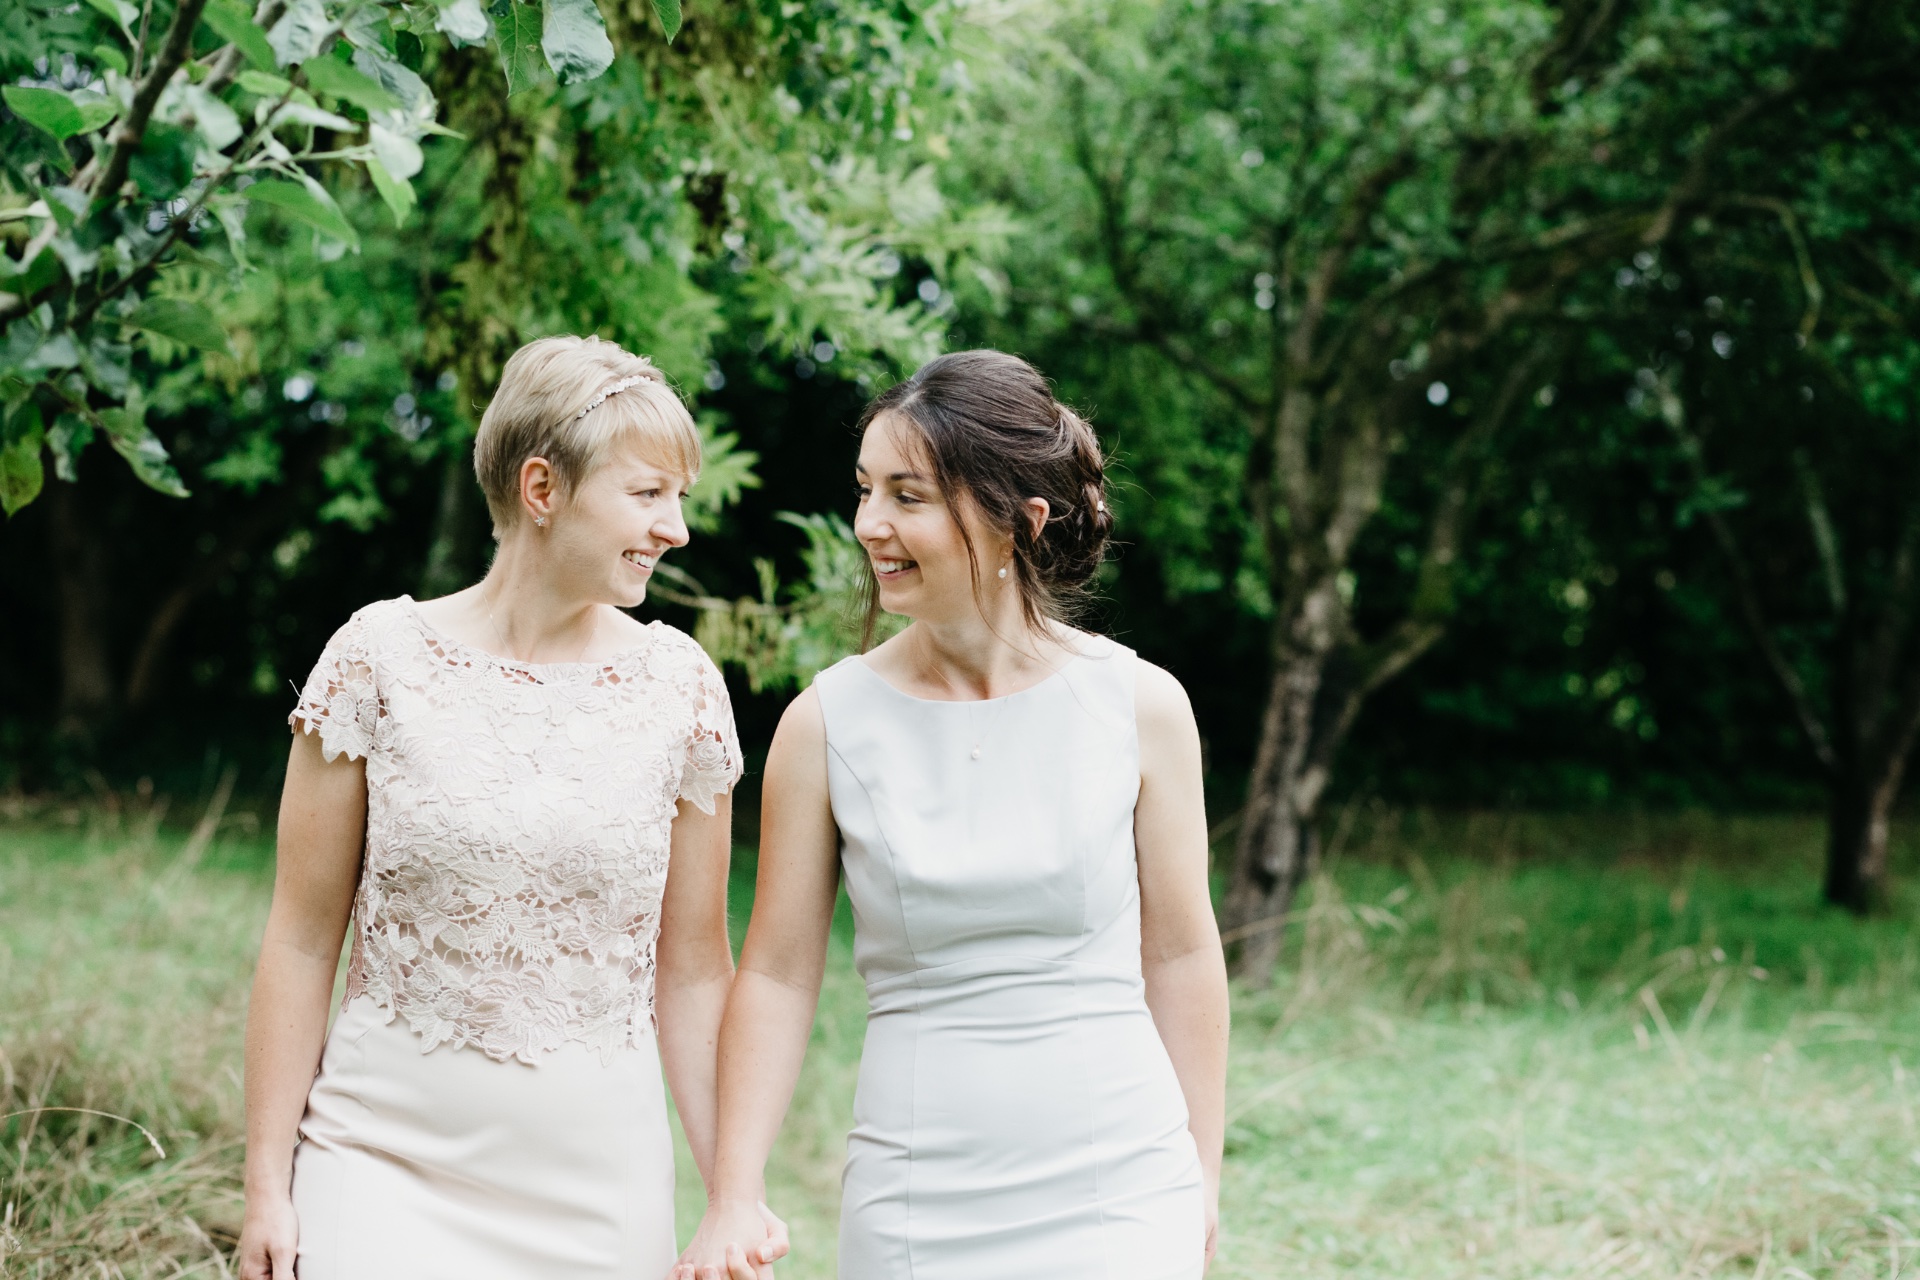 clare and natalie elopement wedding 180